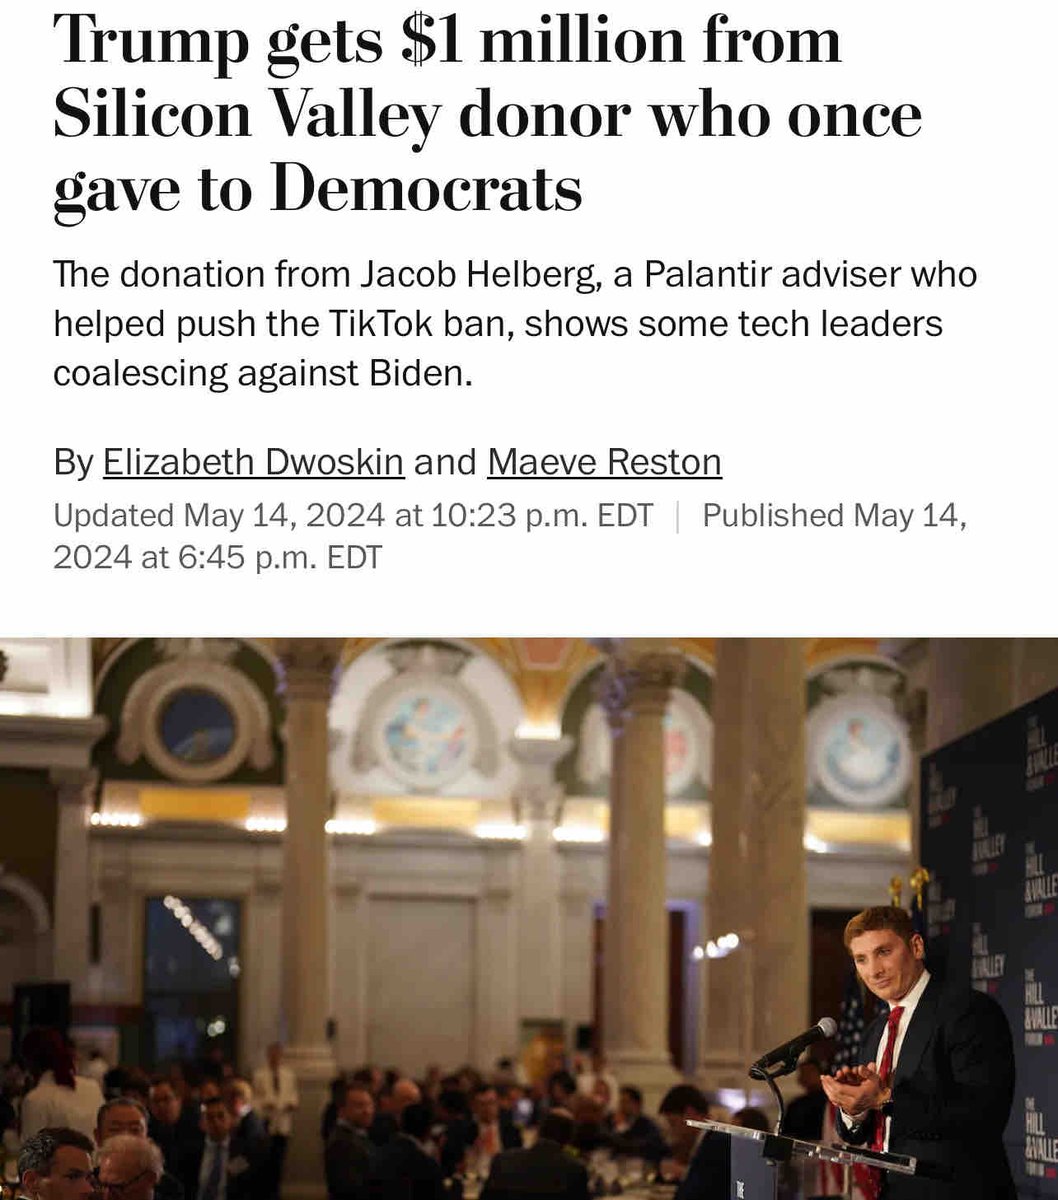 “The donation from Jacob Helberg, a Palantir adviser who helped push the TikTok ban, shows some tech leaders coalescing against Biden” ow.ly/nI5350RGCTM